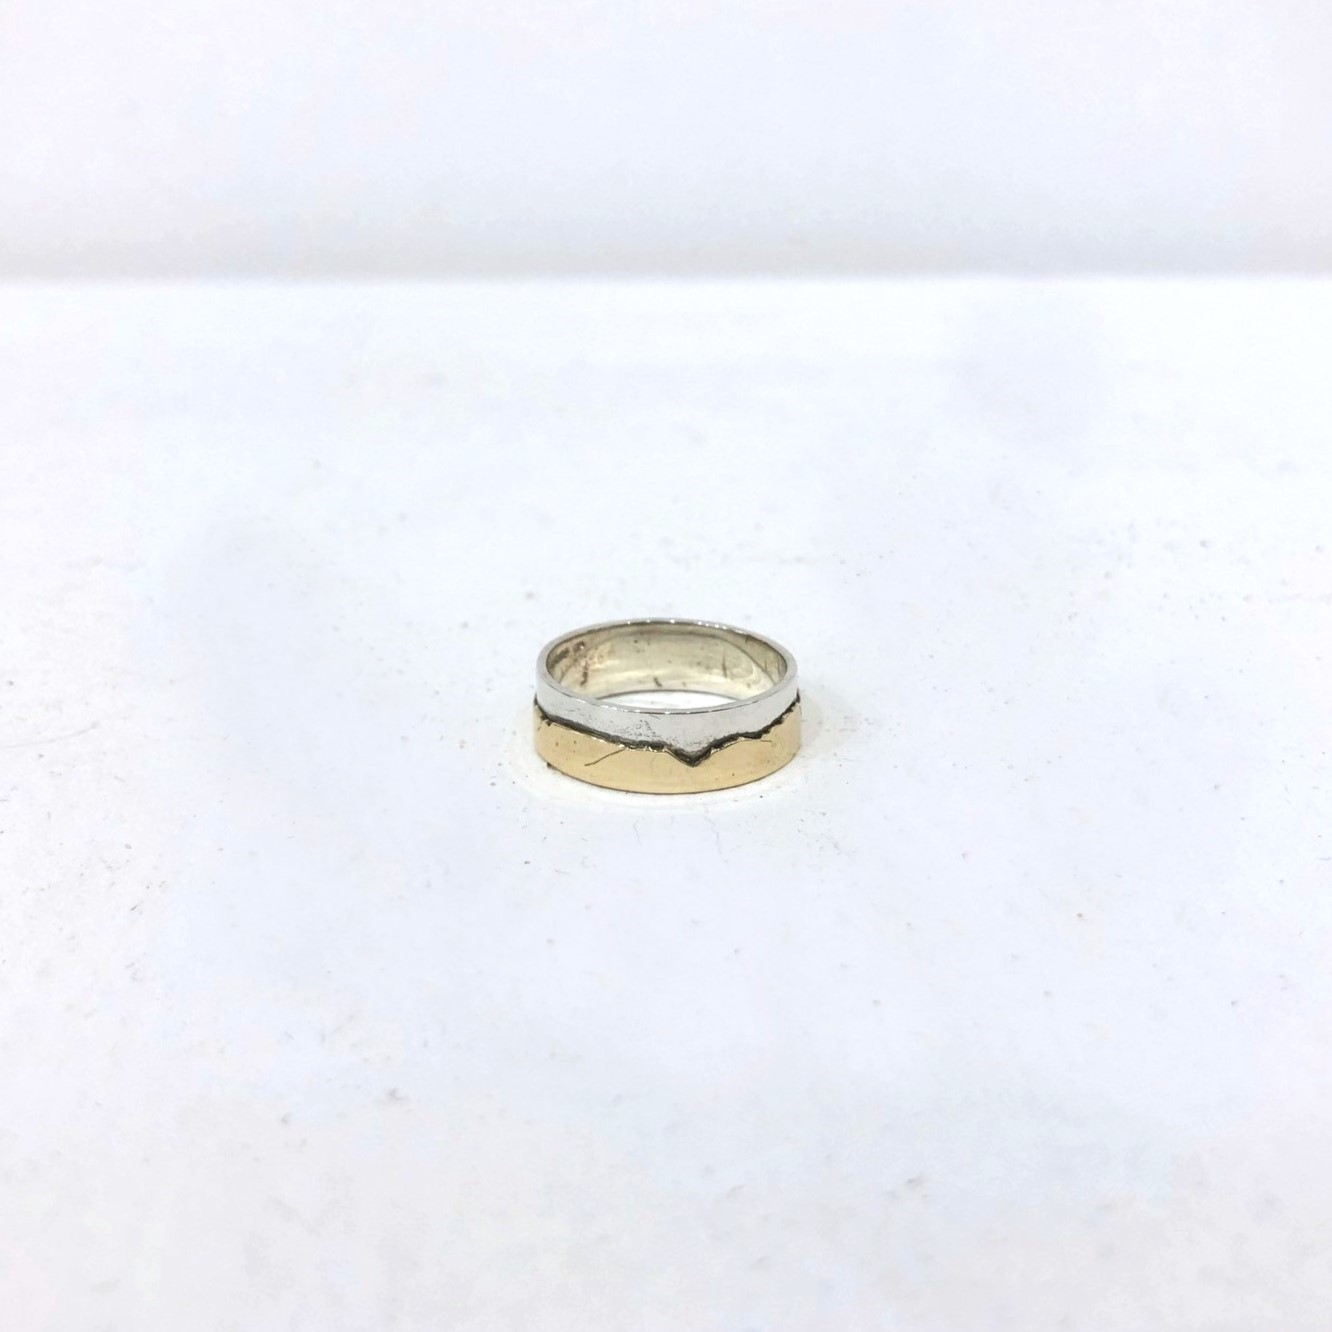 'Cairngorms Ring | Sterling Silver & 9ct Gold' by artist Jen Cunningham